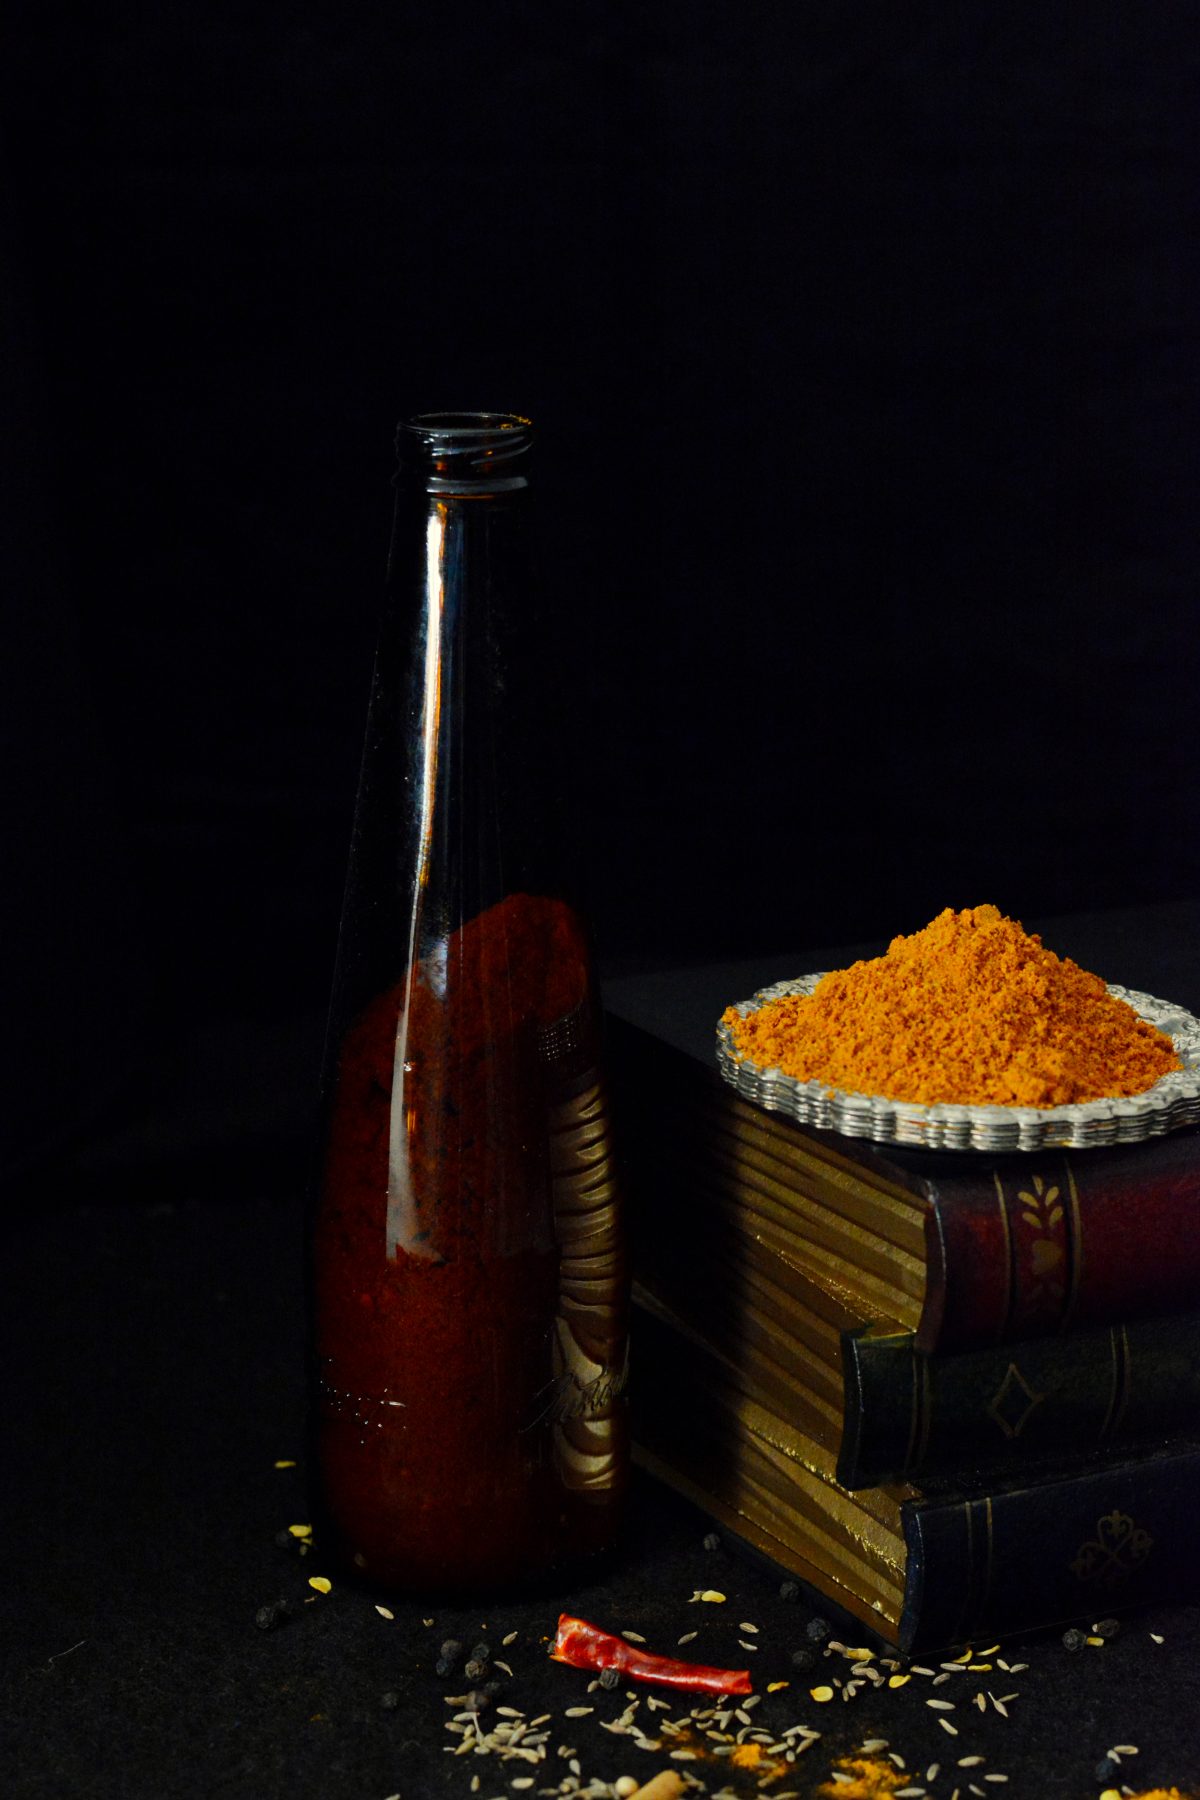 East Indian Bottle Masala - a traditional spice blend from Eastern India - thespiceadventuress.com